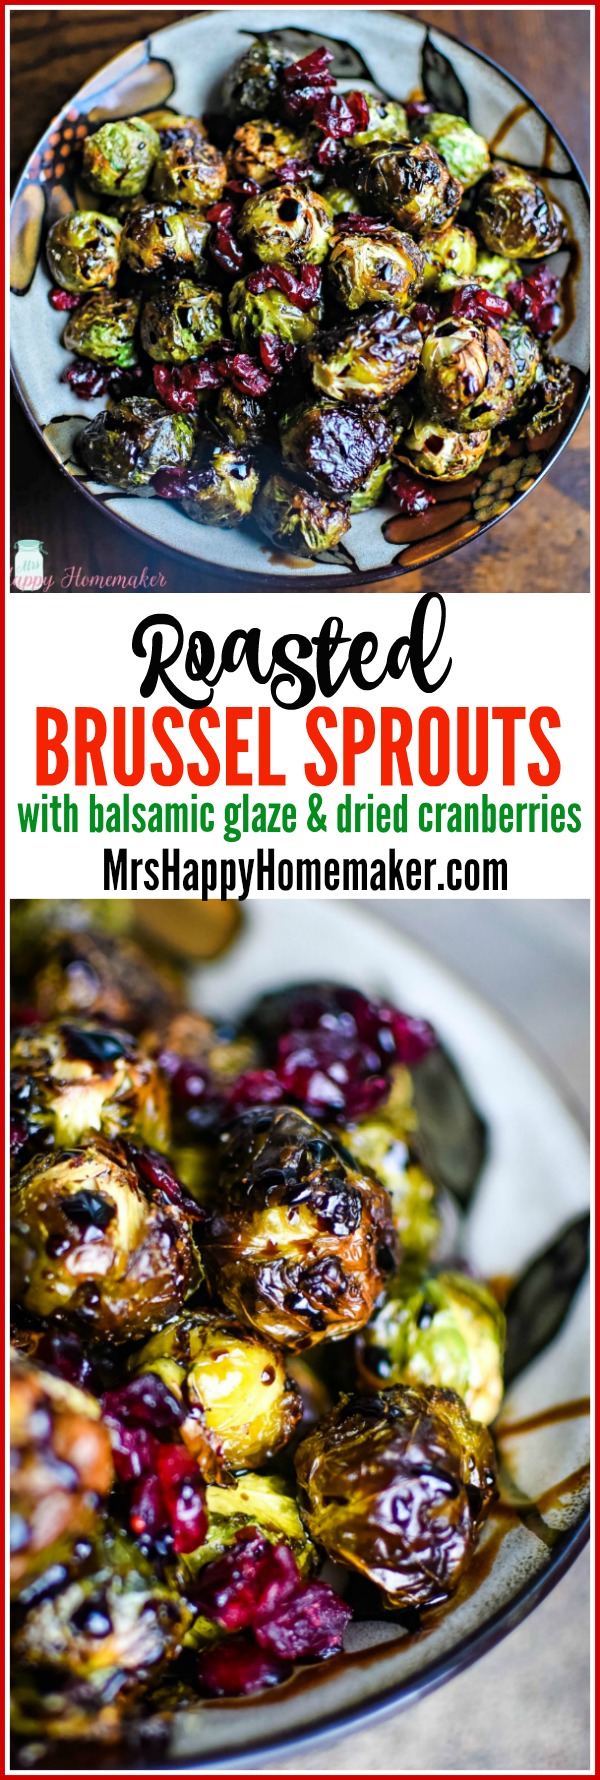 Balsamic Cranberry Roasted Brussel Sprouts - roasted to perfection & drizzled with a balsamic glaze & dried cranberries | MrsHappyHomemaker.com